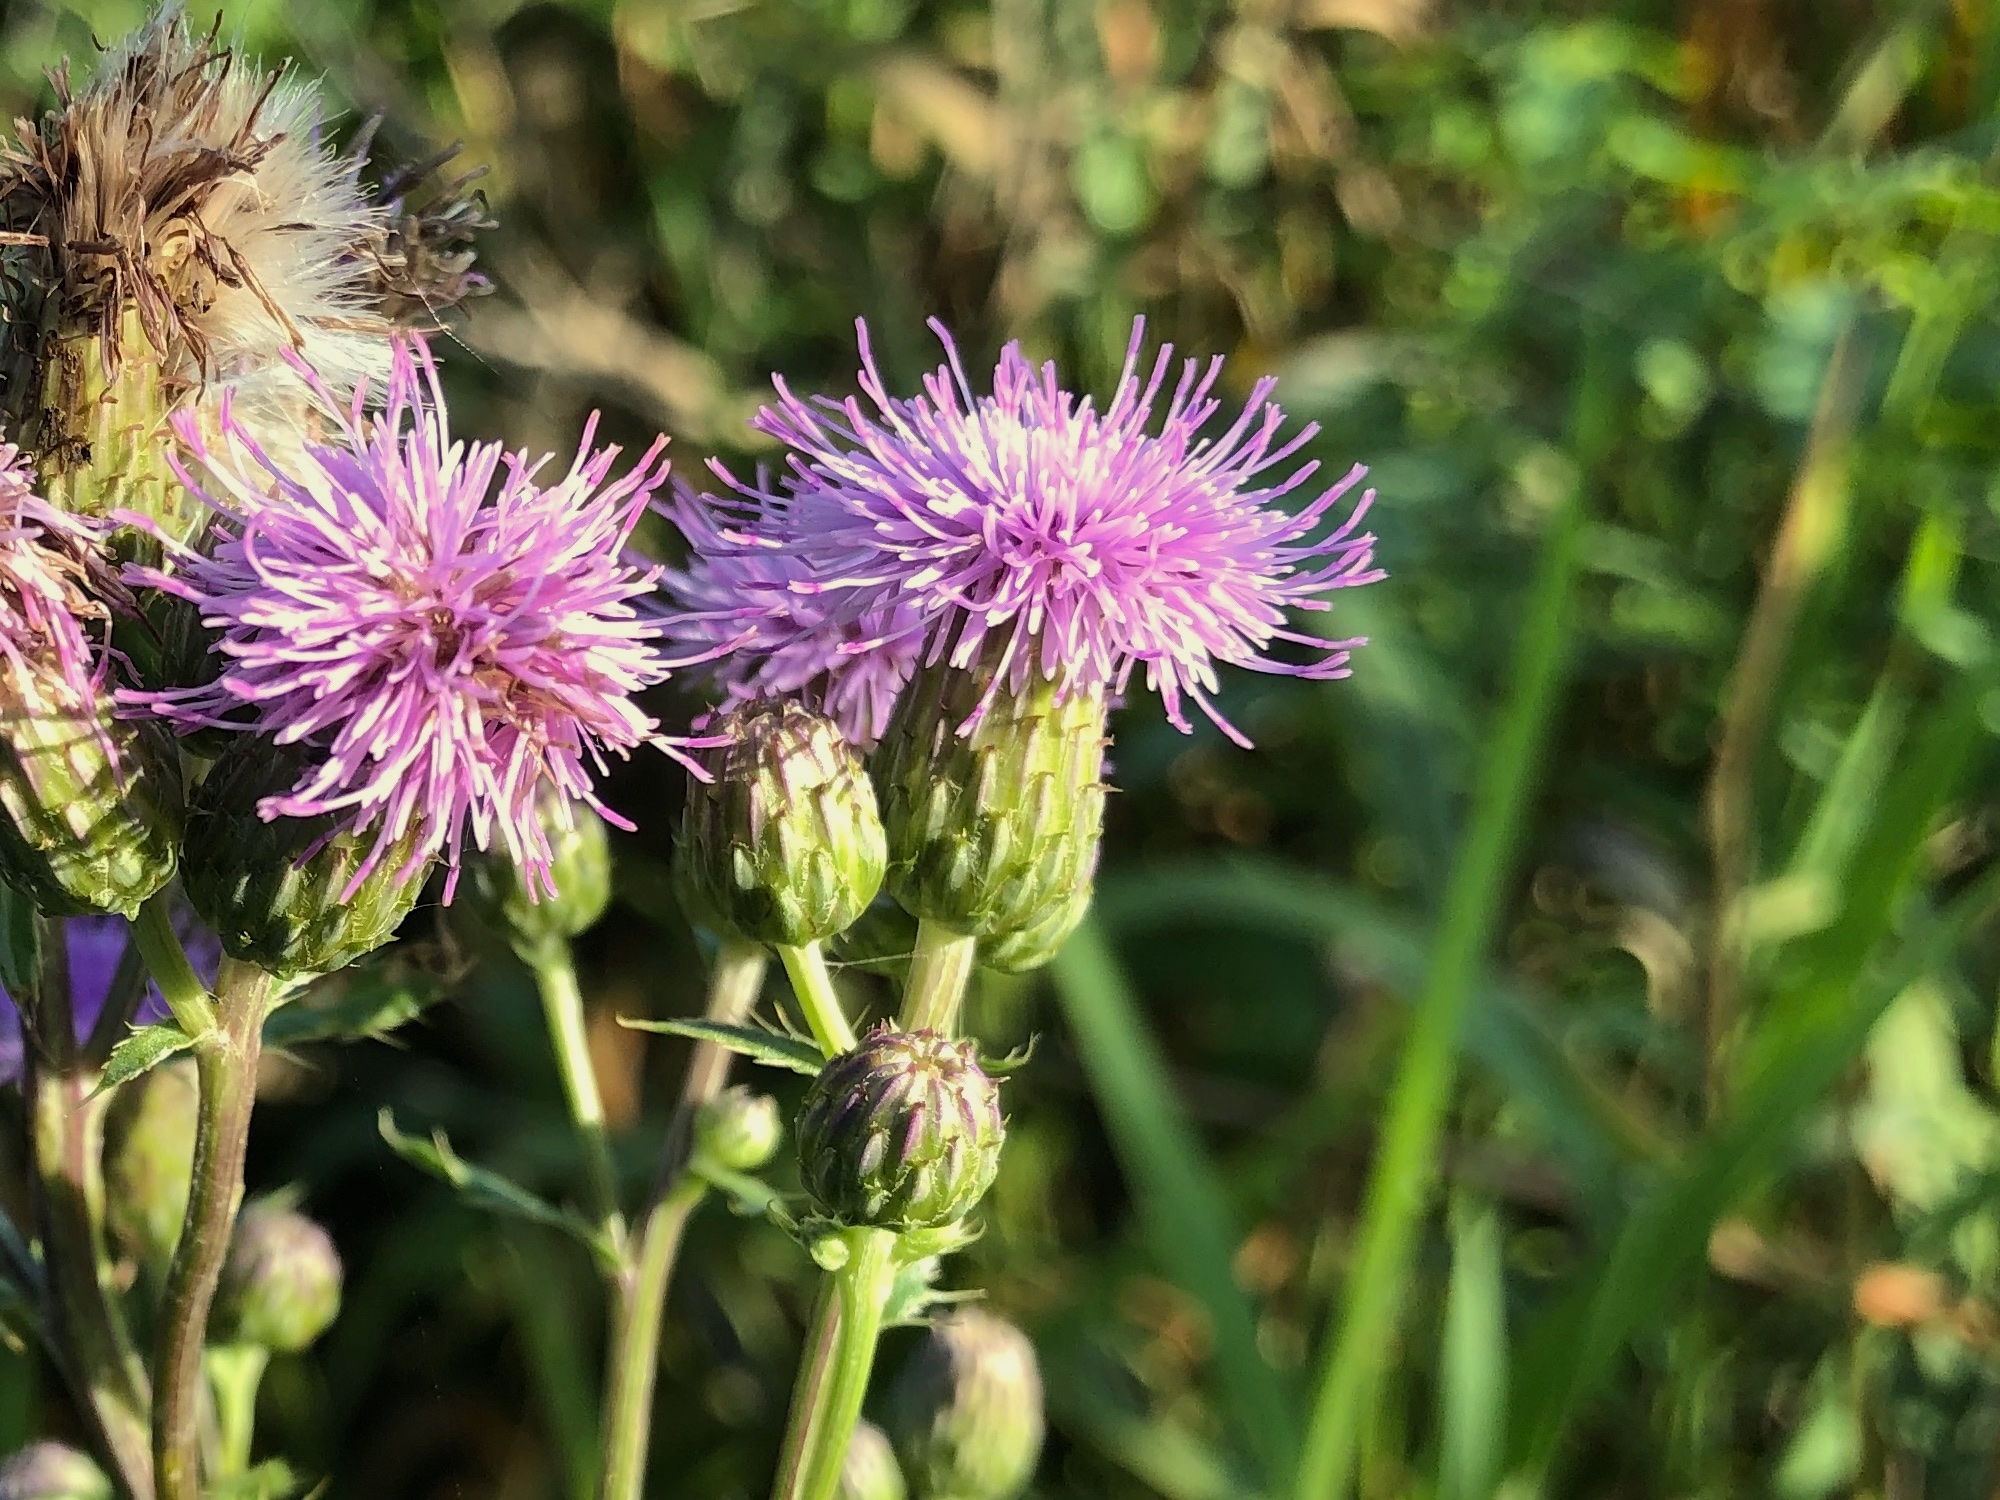 Canada Thistle on the sshore of Marion Dunn Pond in Madison, Wisconsin on July 10, 2019.